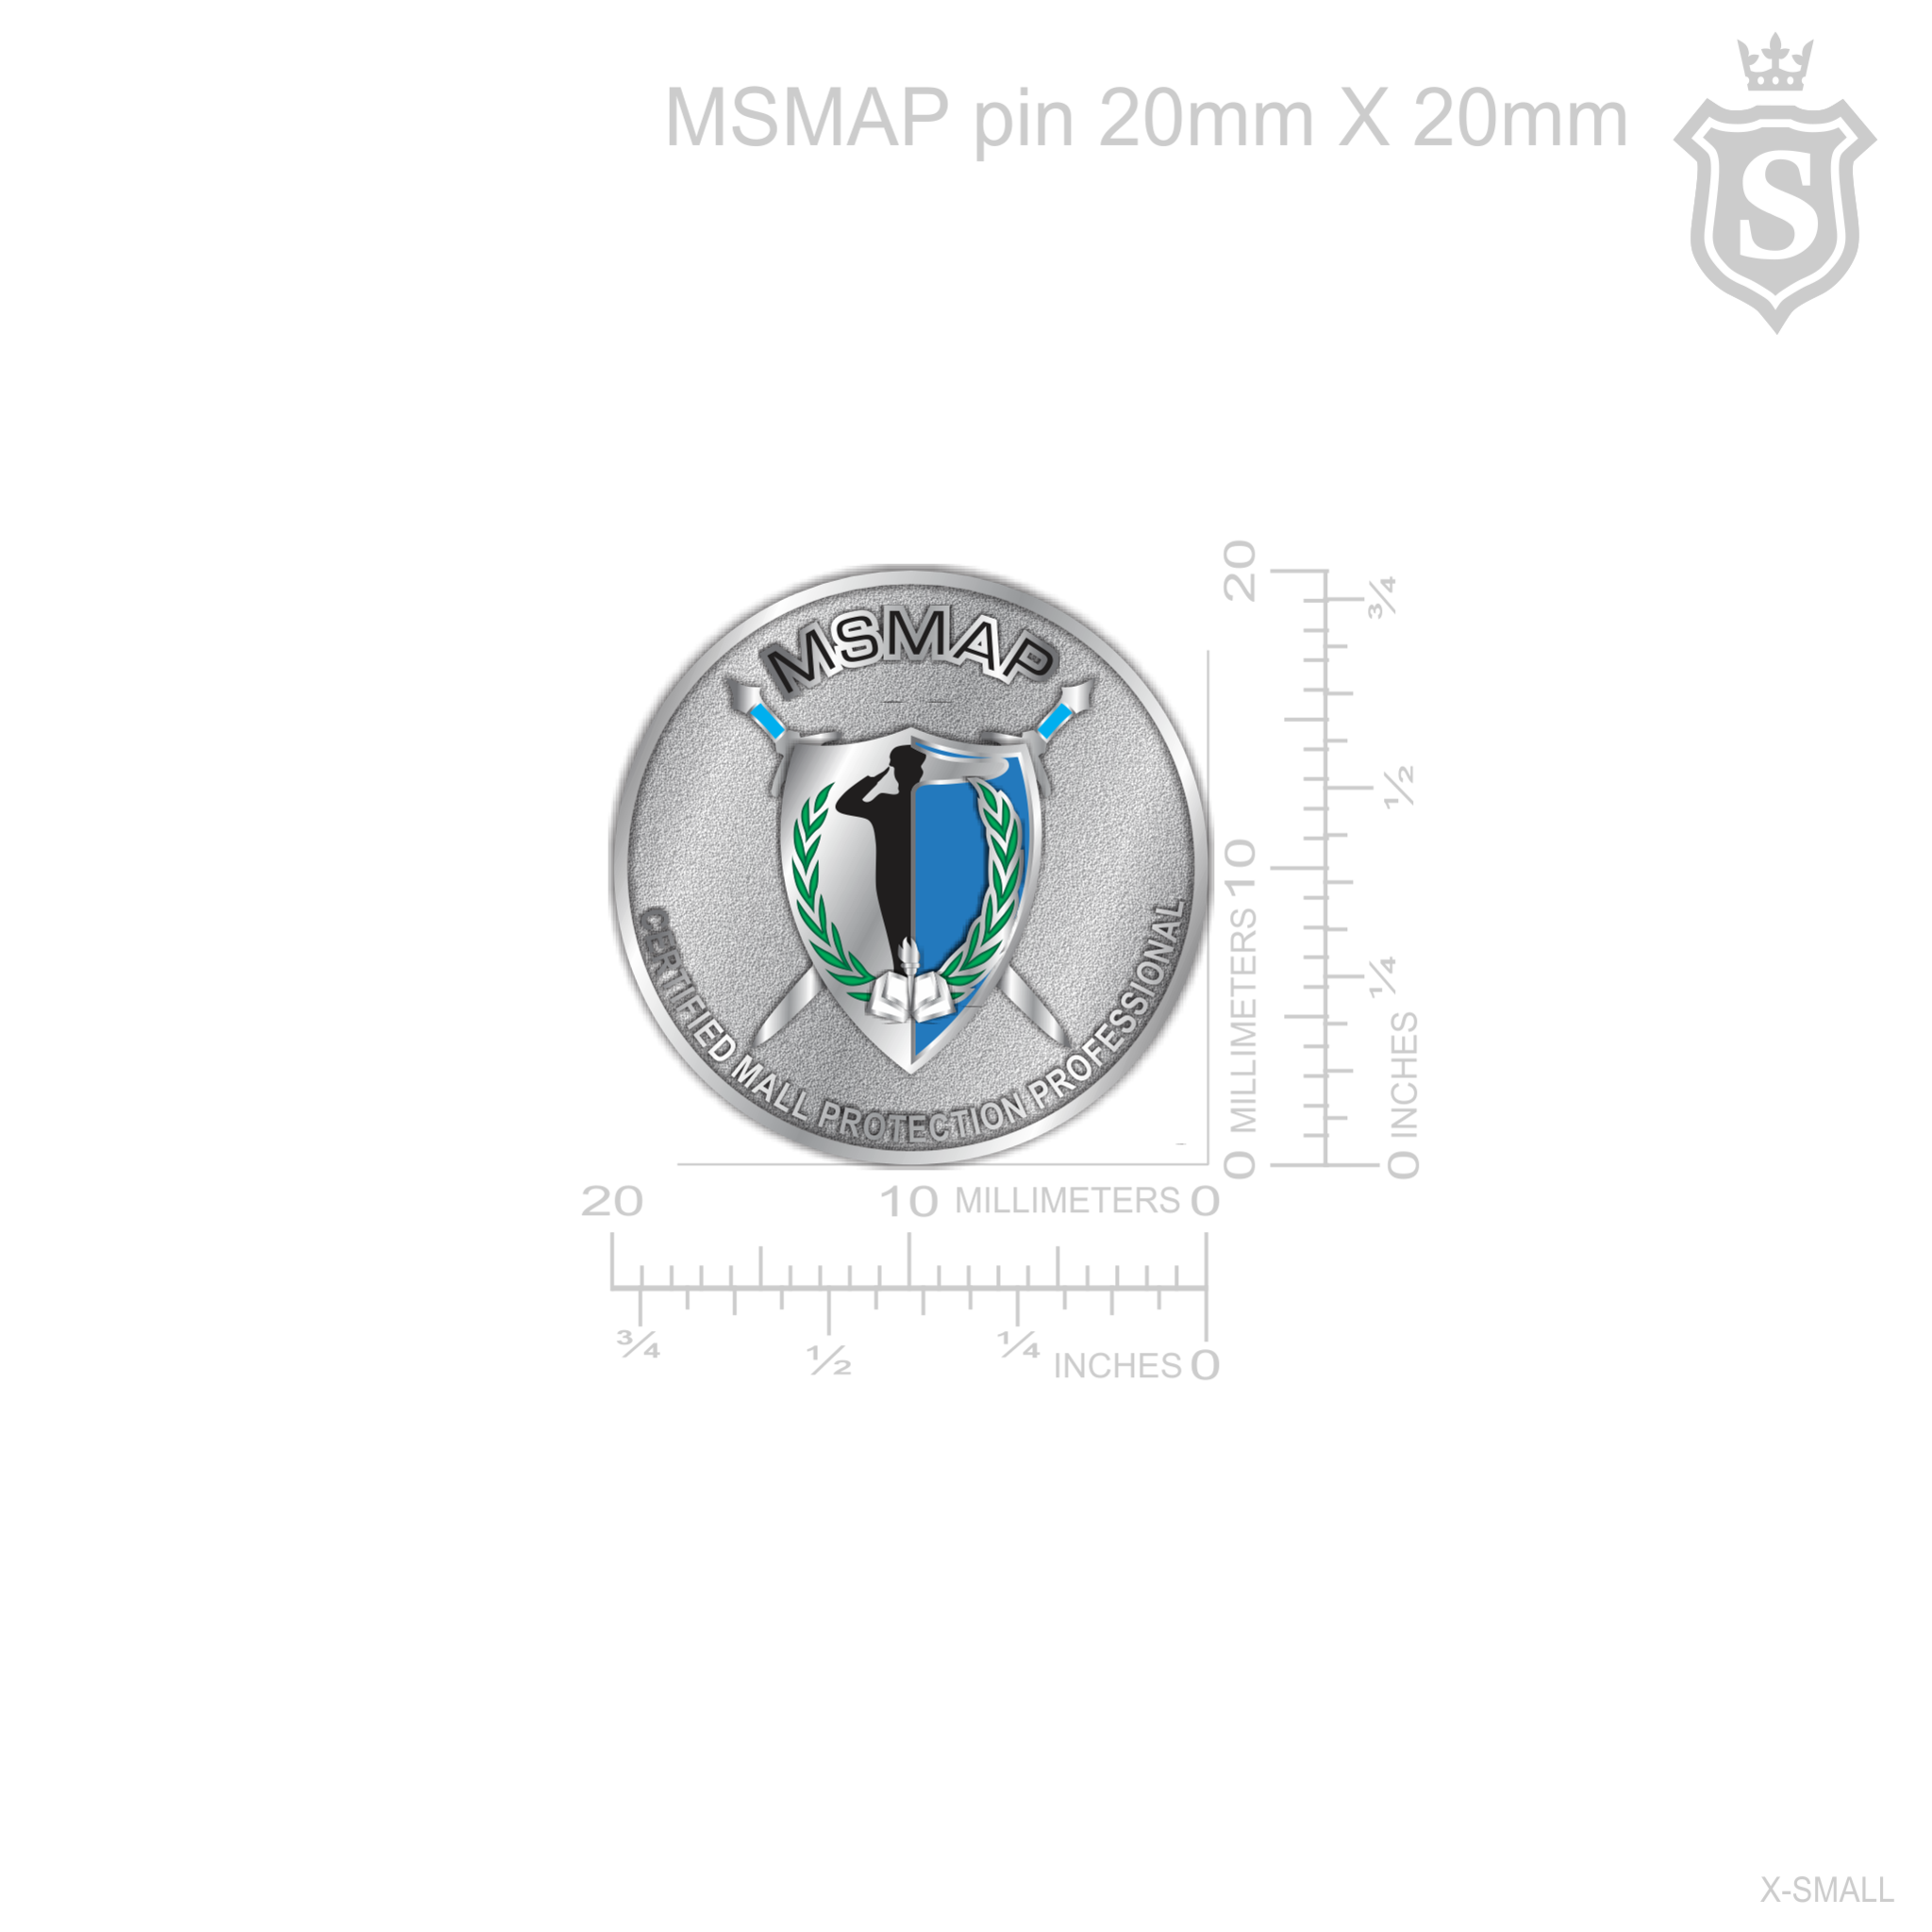 Mall Security Management Association of the Philippines (MSMAP) Pin - PSA-SG